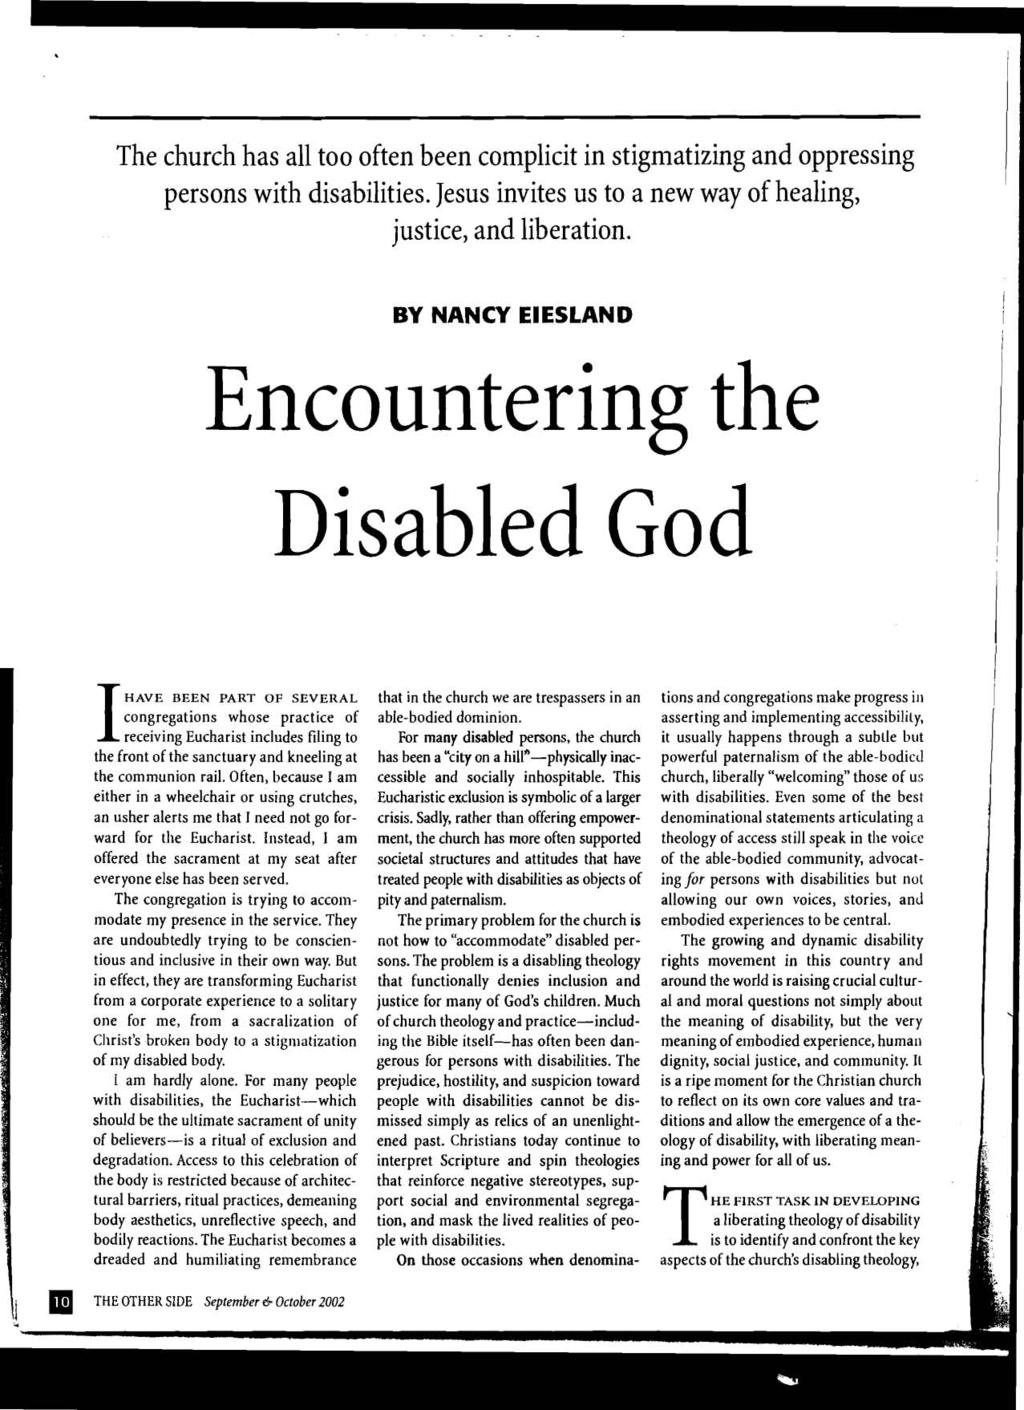 The church has all too often been complicit in stigmatizing and oppressing persons with disabilities. Jesus invites us to a new way of healing, justice, and liberation.